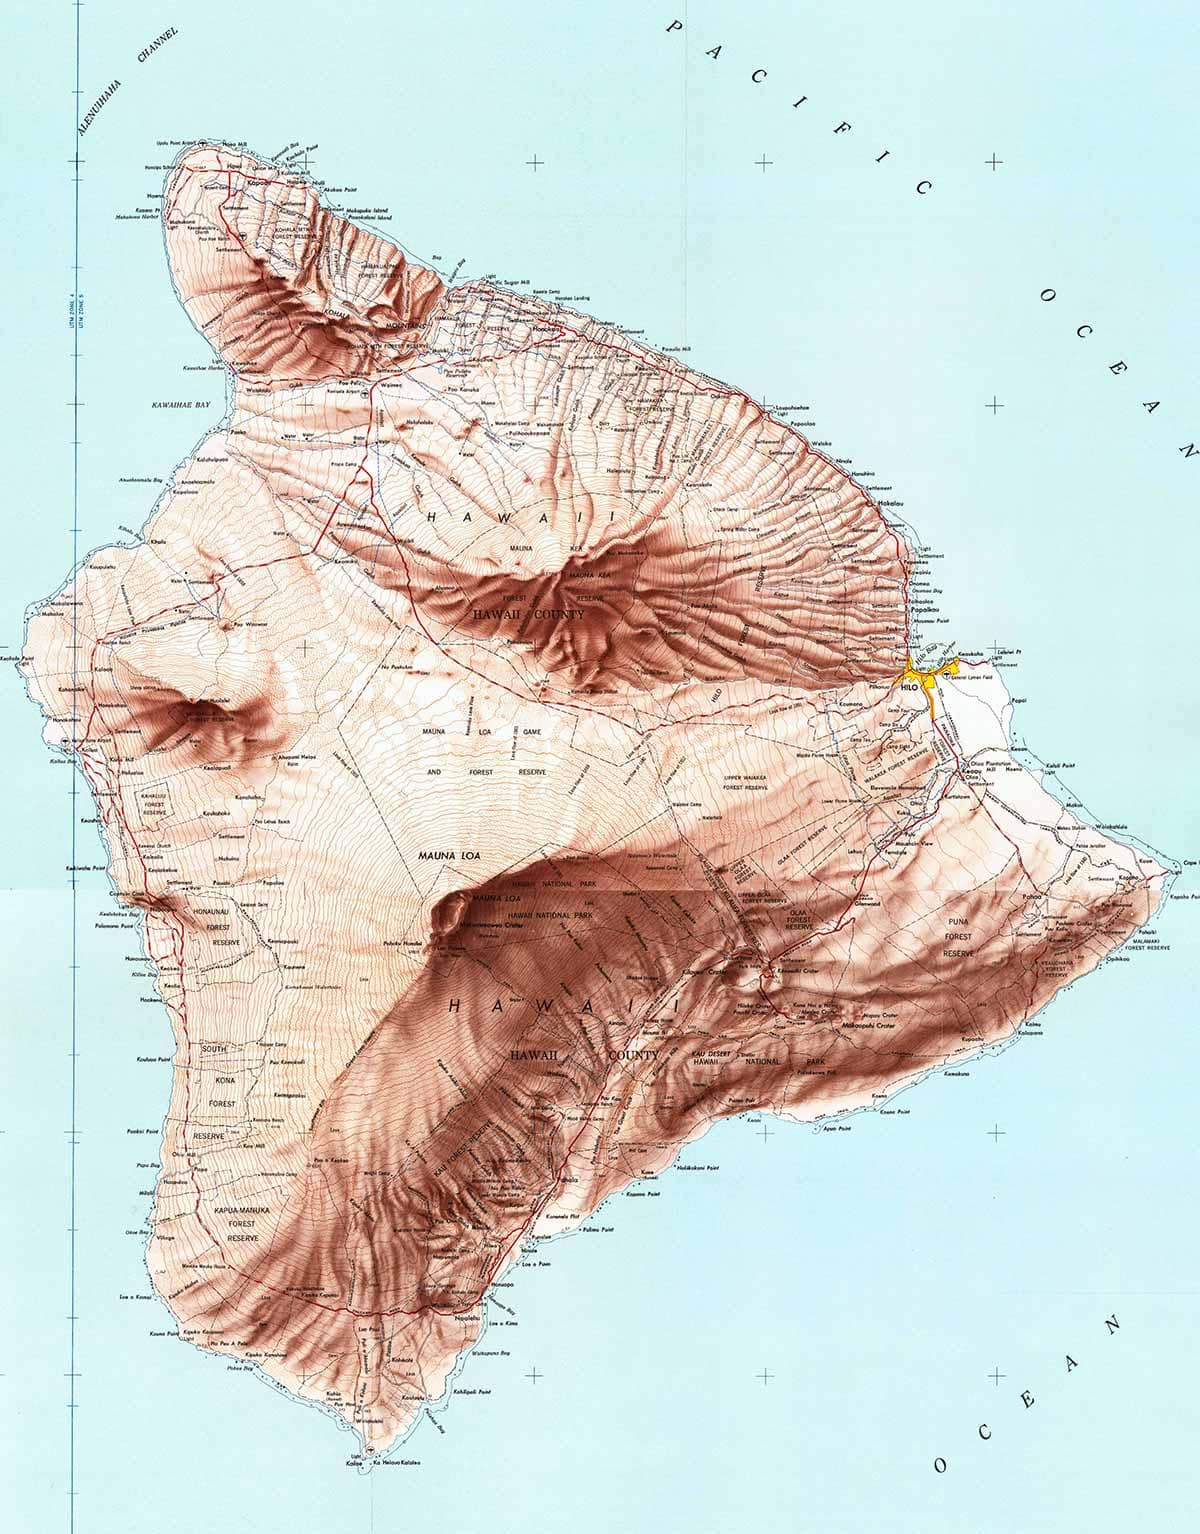 Topographic map of the island of Hawai‘i.